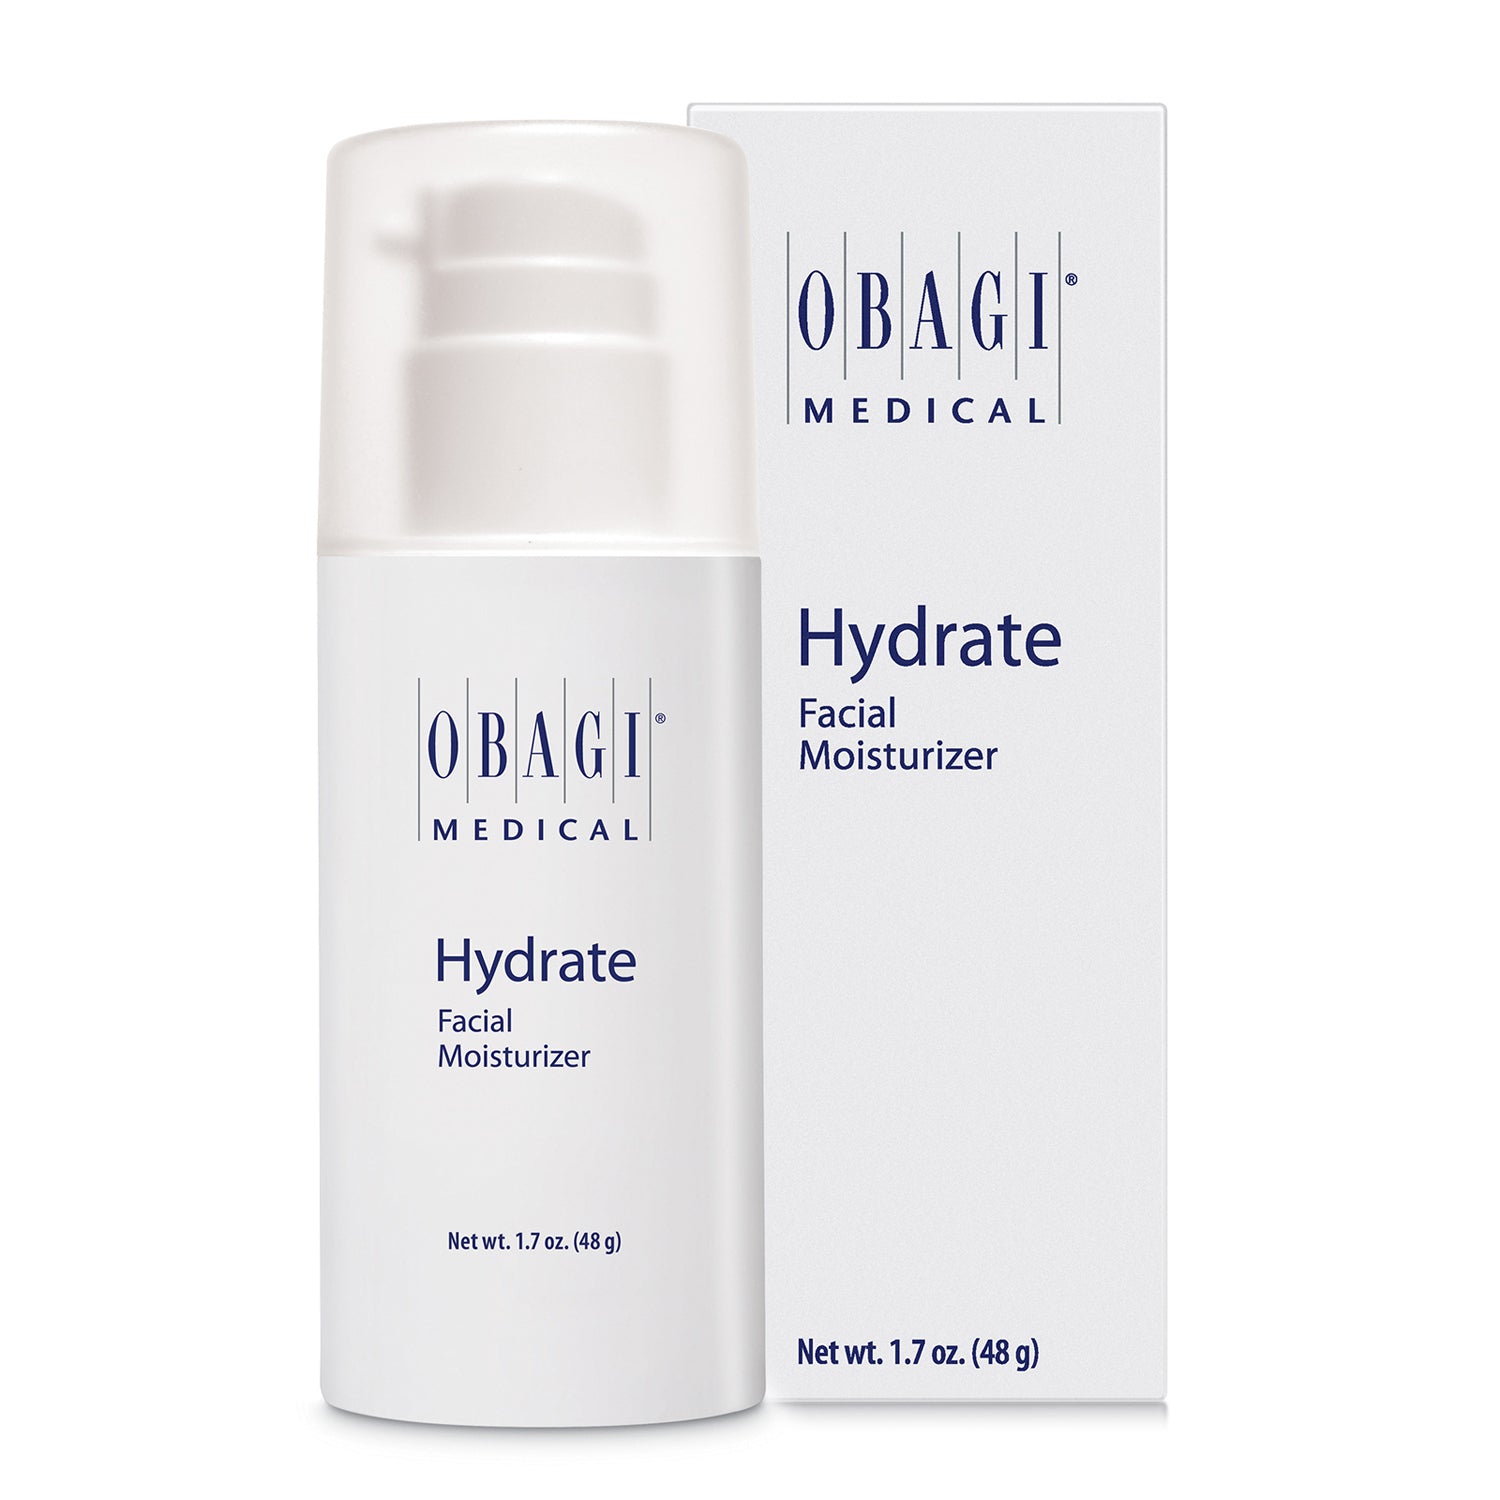 Obagi Hydrate Facial Moisturizer from MyExceptionalSkinCare.com Bottle and Box Only